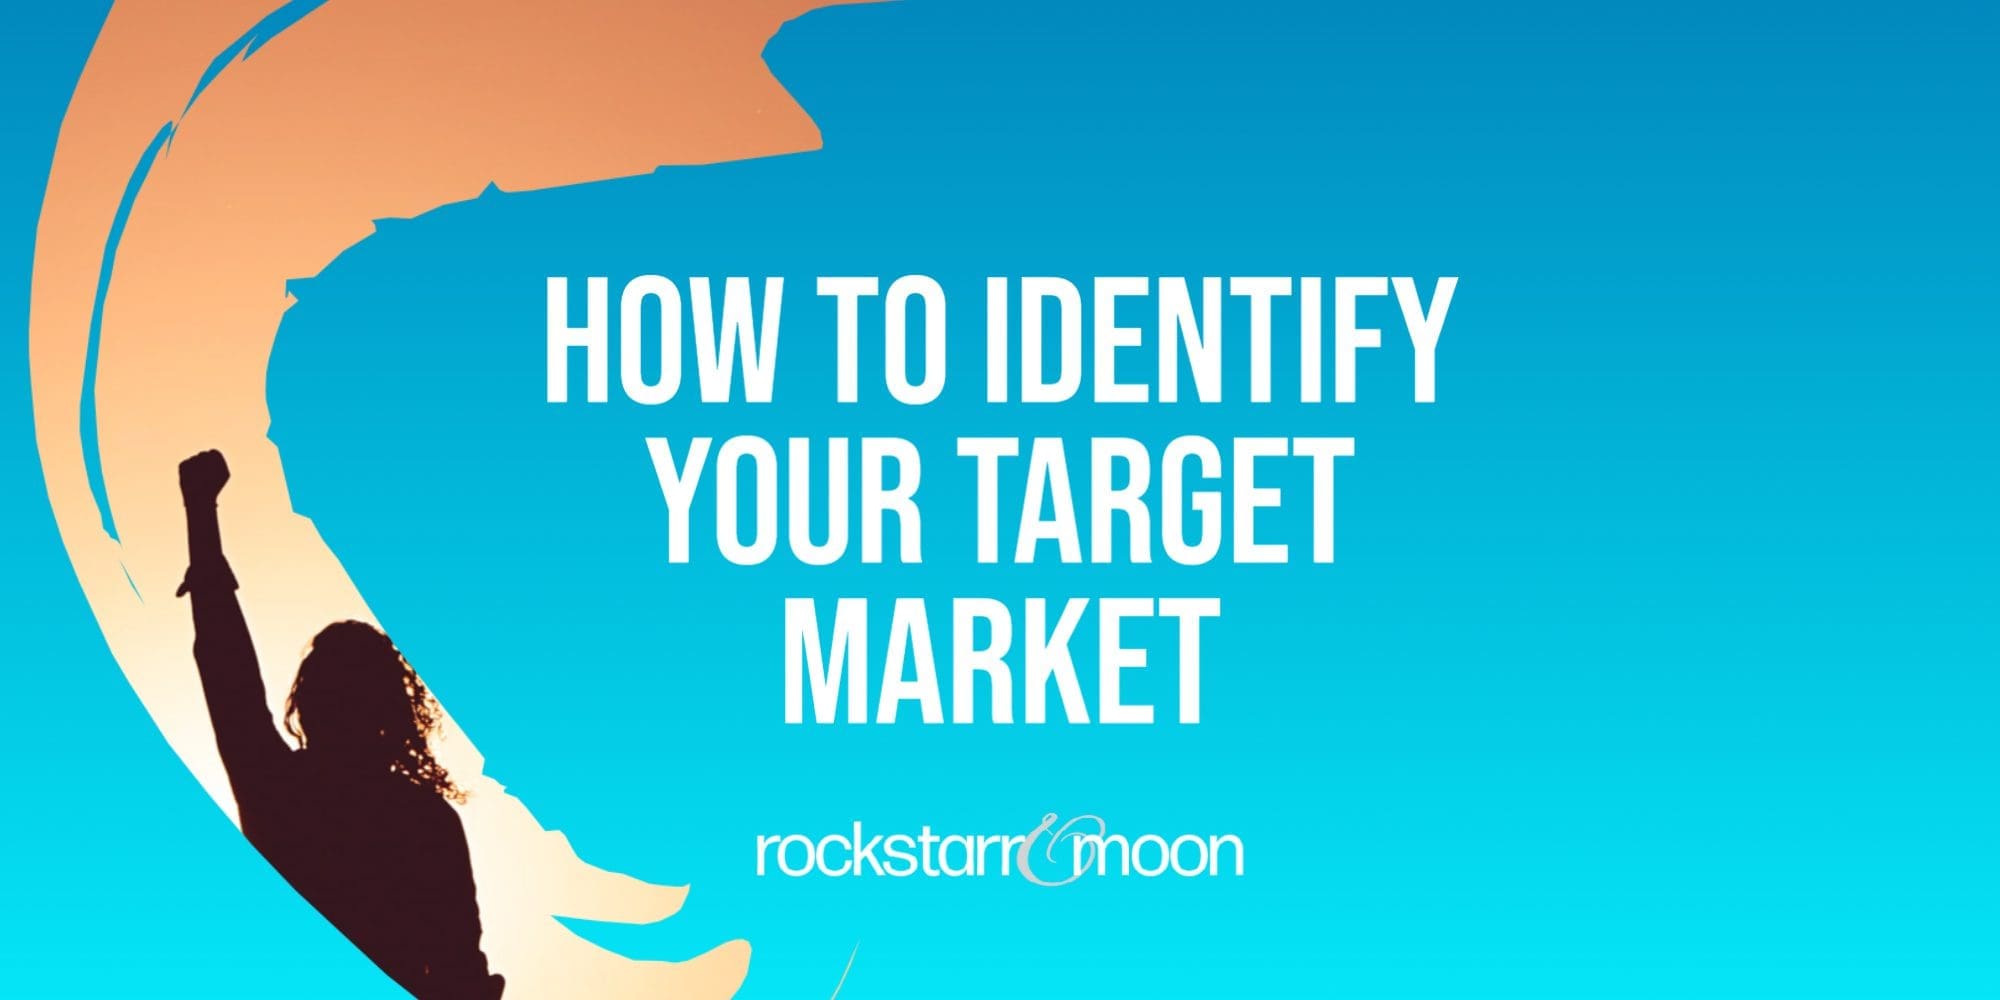 How To Identify Your Target Market